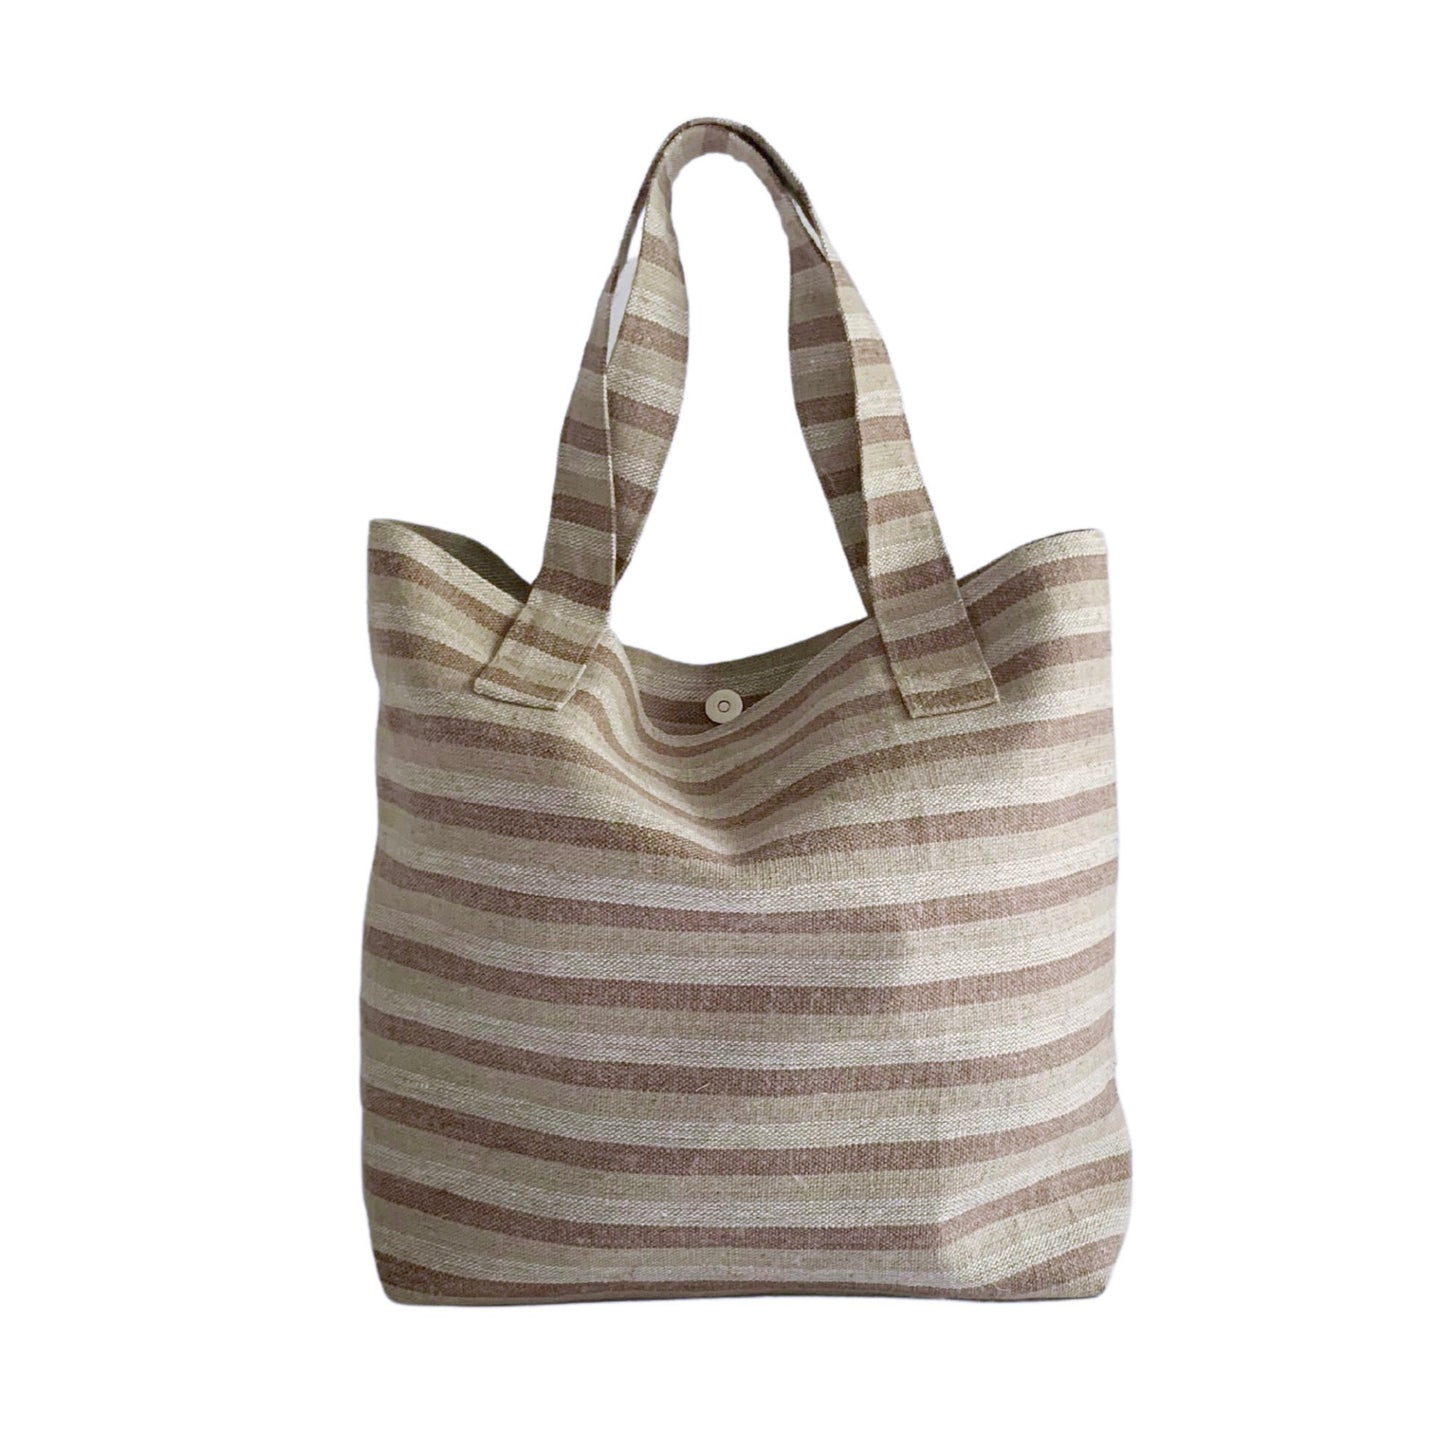 Beach bag in natural woven fabric with neutral color stripes